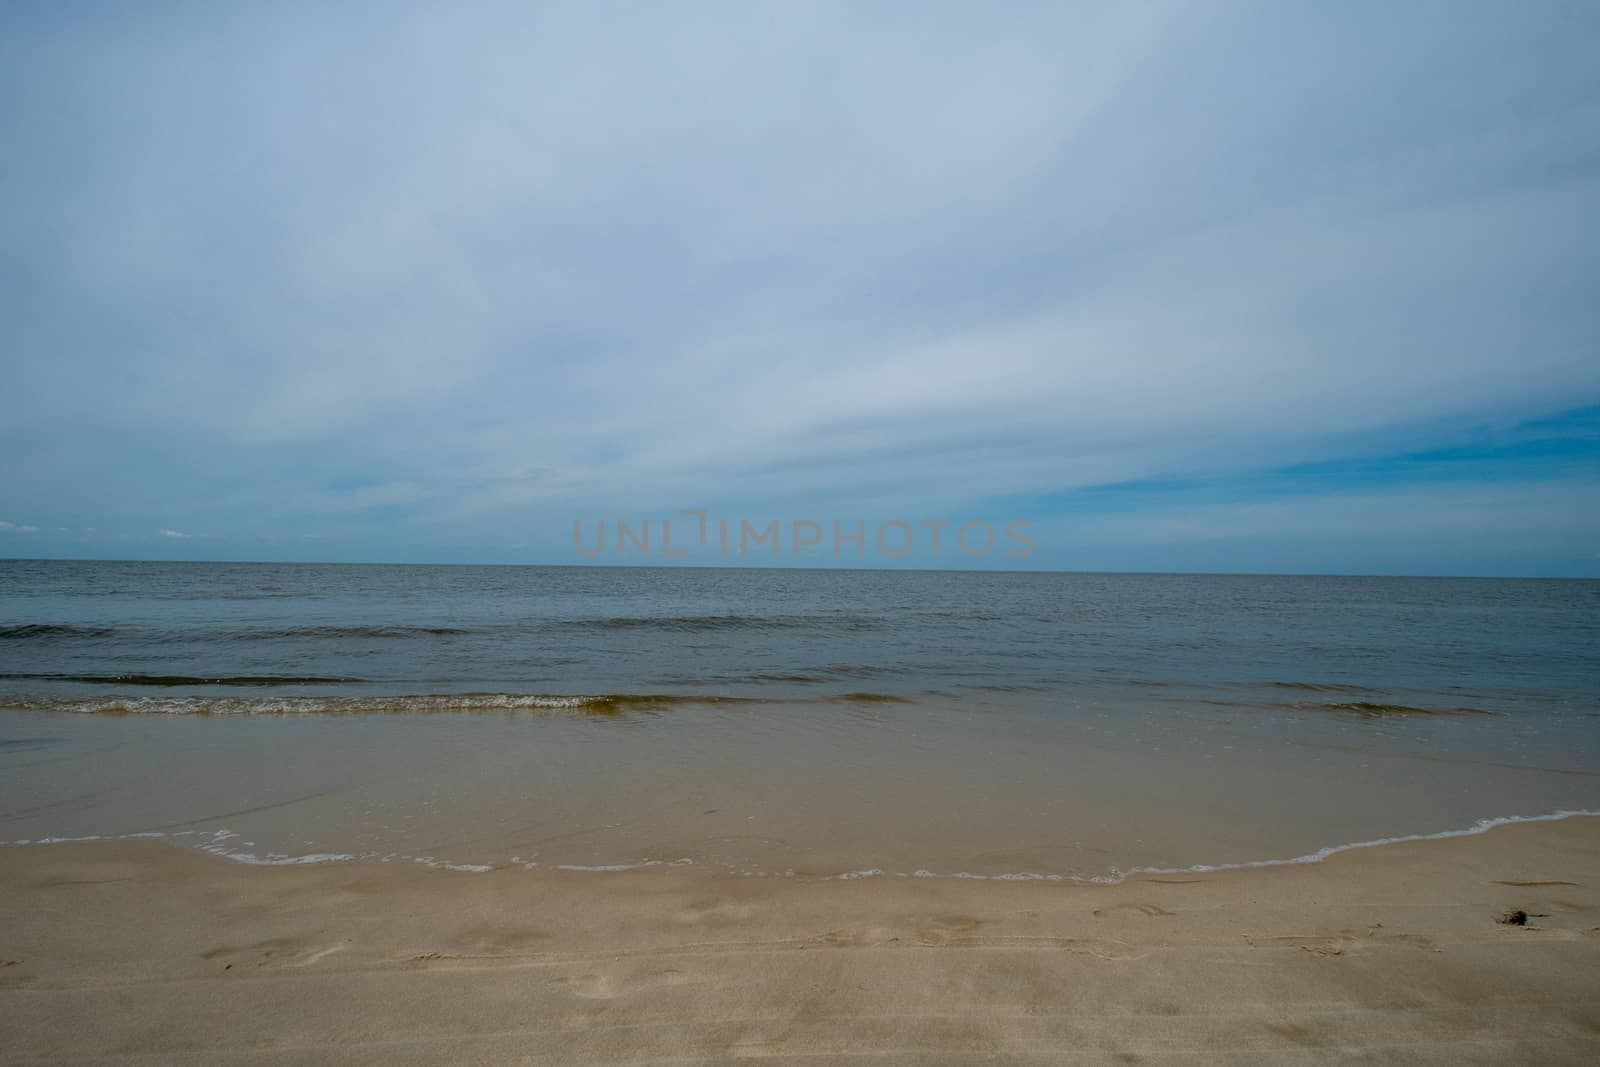 A Beach View on a Cloudy Day at the Bay in The Villas, New Jerse by bju12290